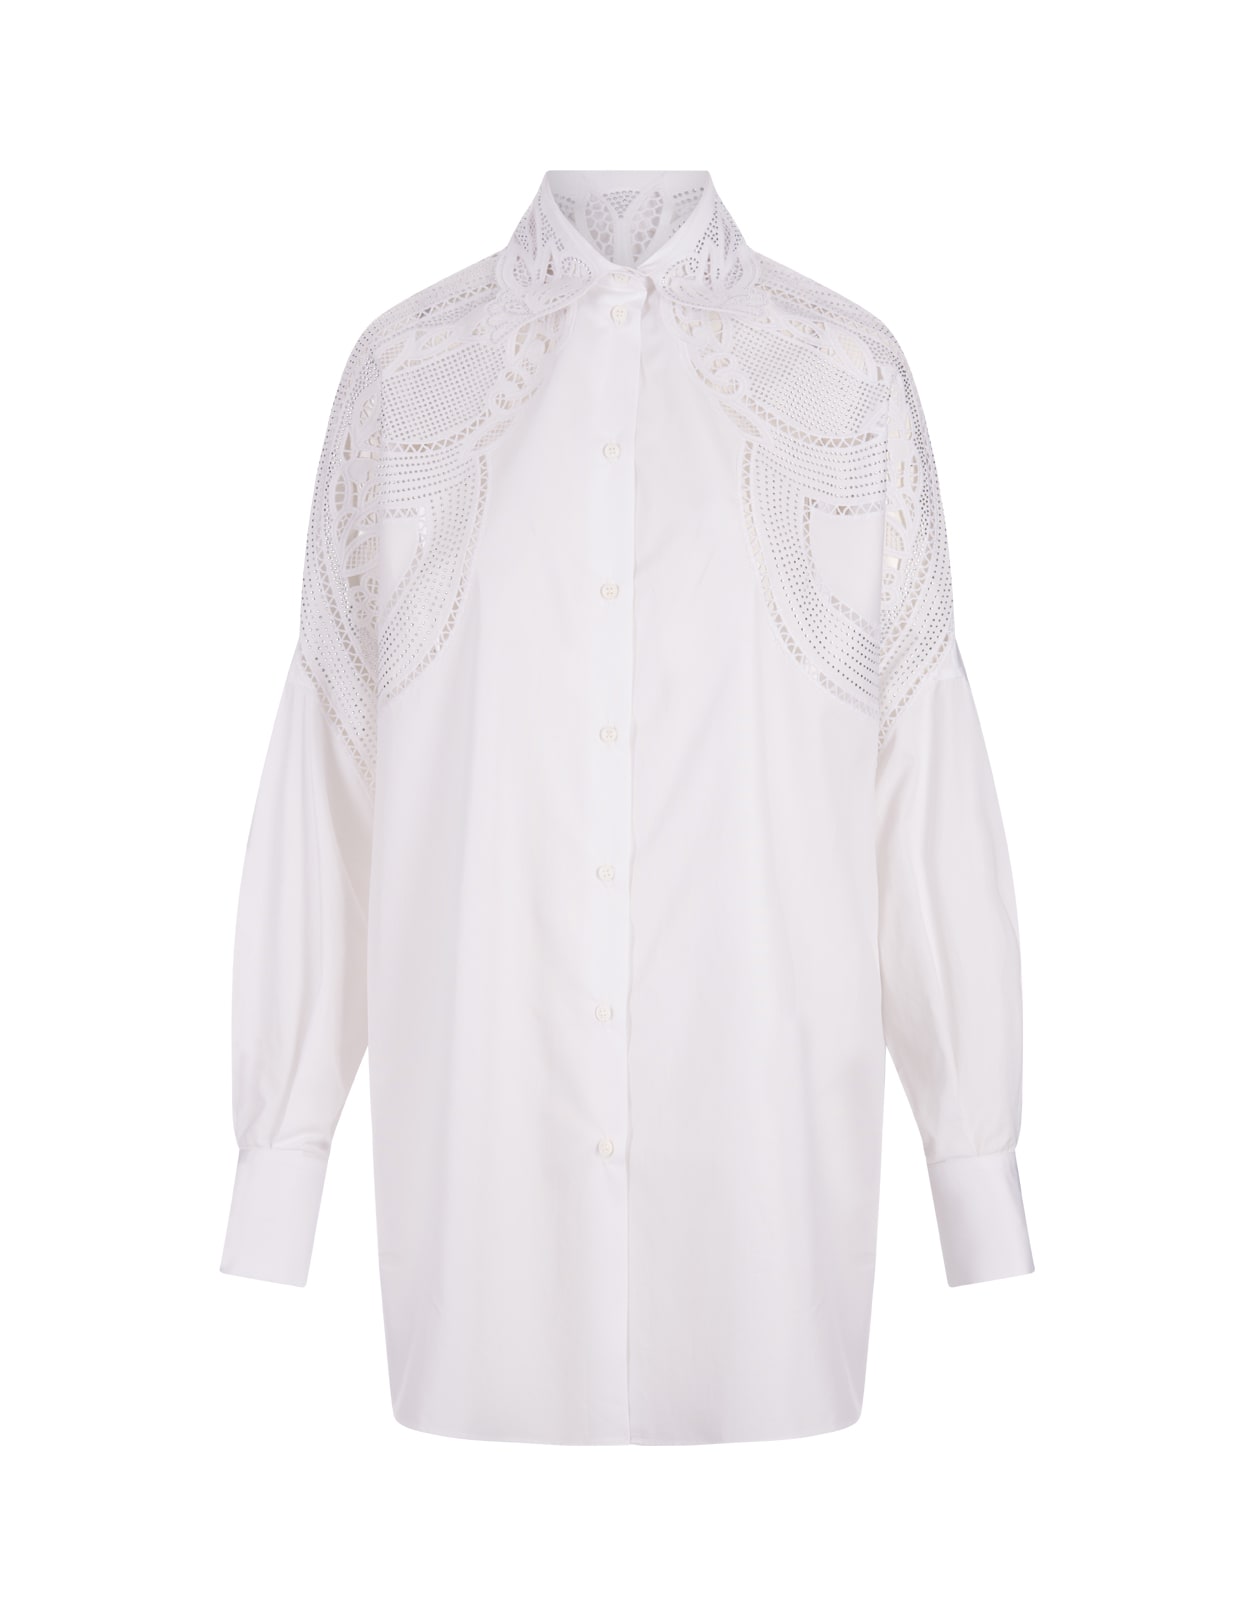 White Over Shirt With Sangallo Lace Cut-outs